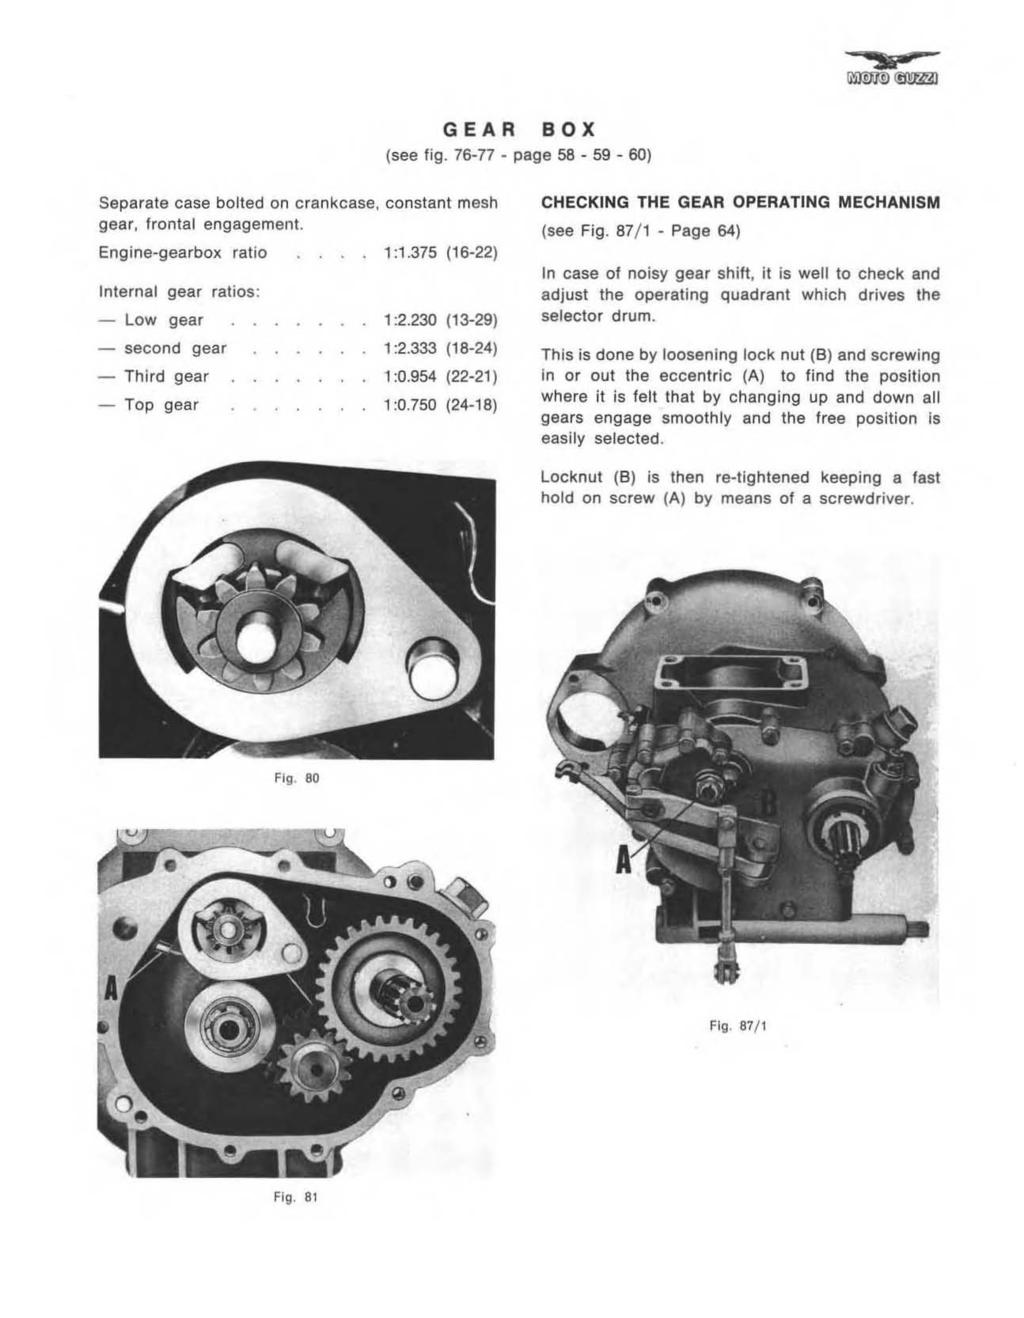 GEAR BOX (see fig. 76-77 - page 58-59 - 60) Separate case bolted on crankcase, constant mesh gear, frontal engagement.